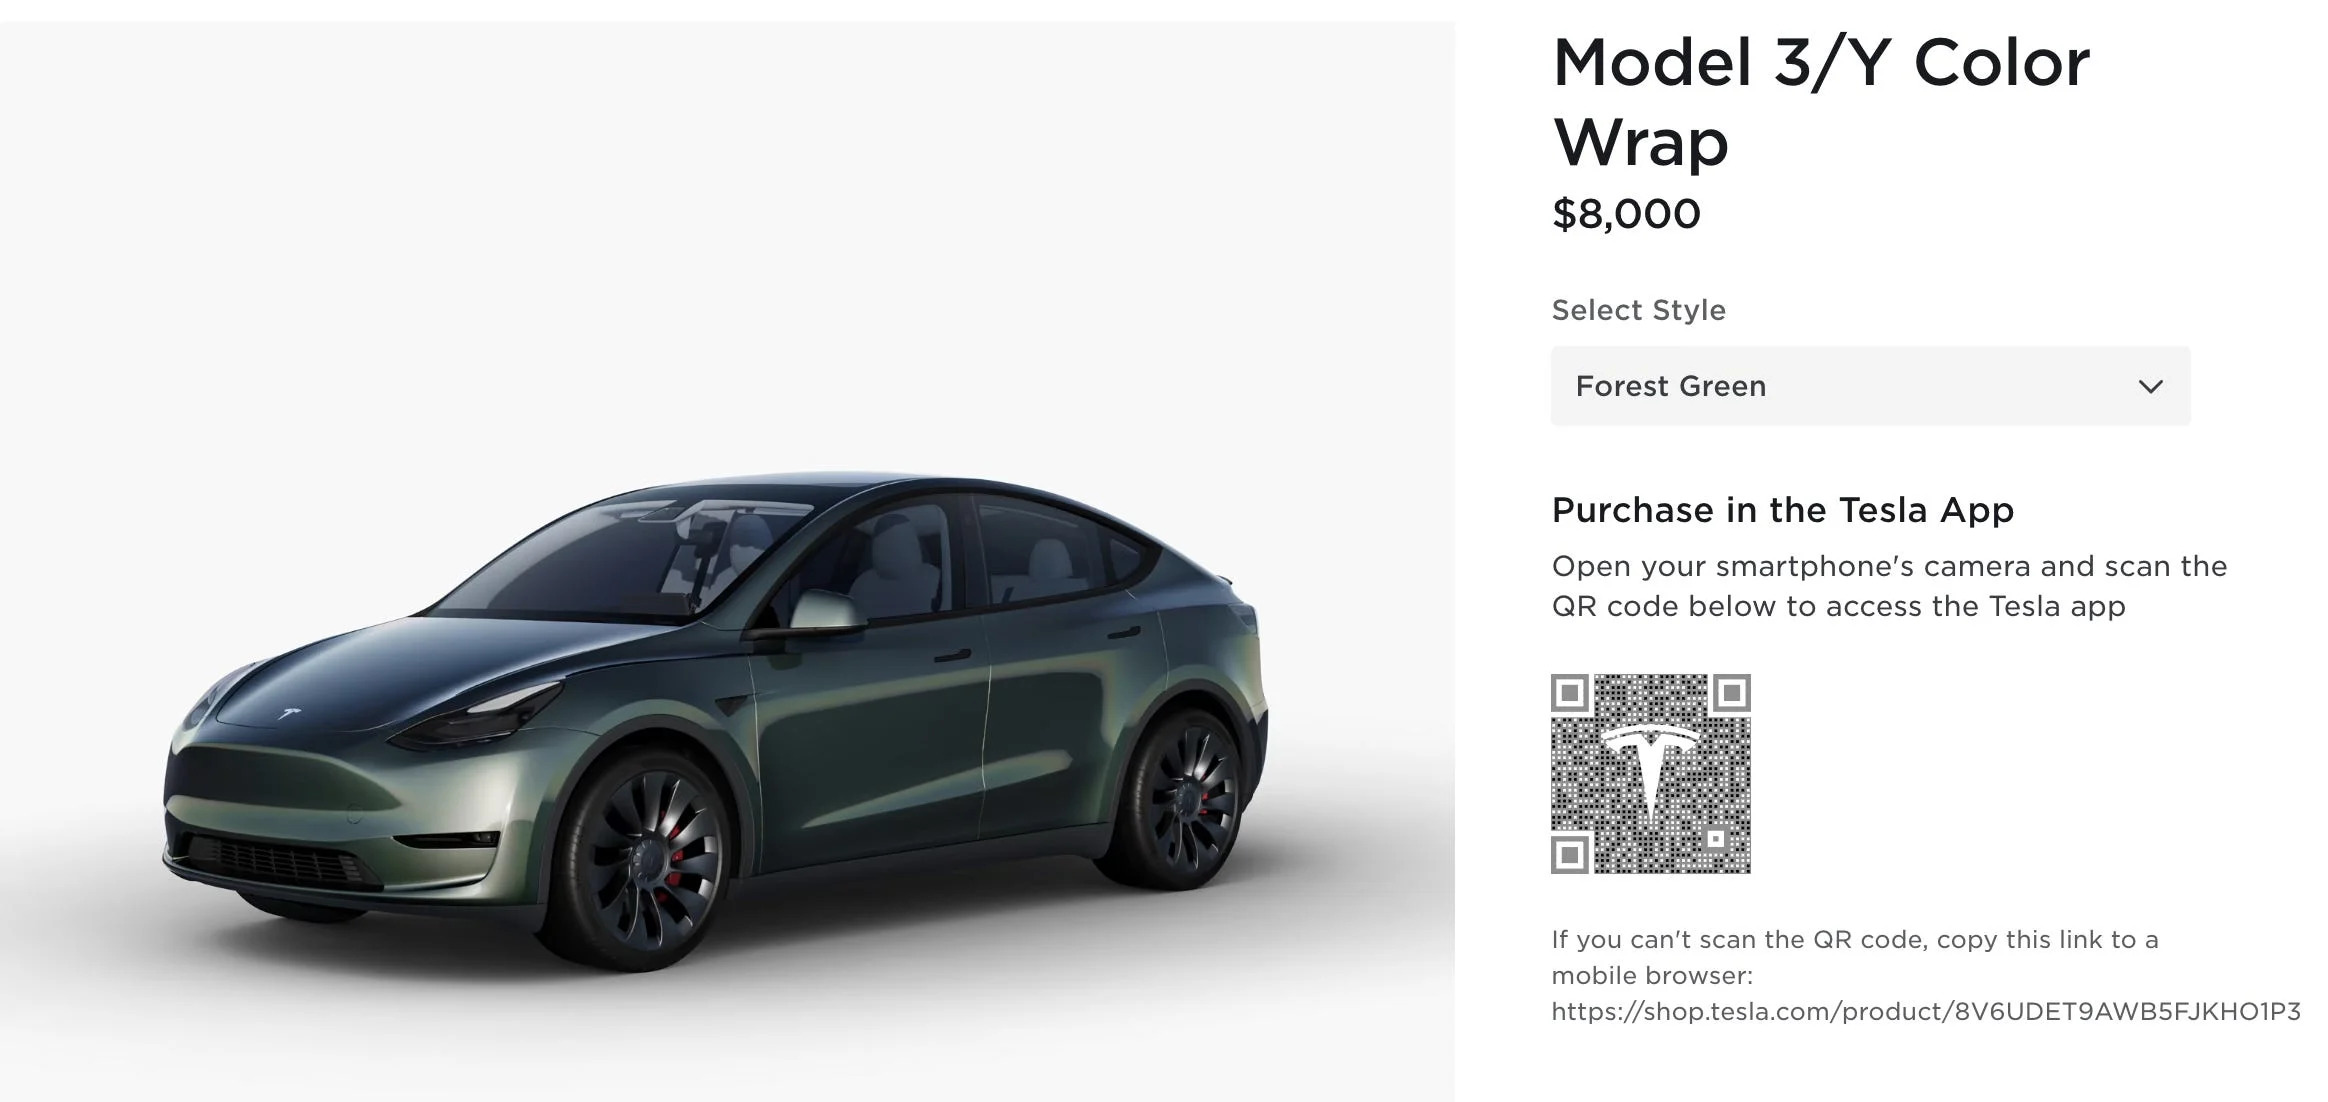 Tesla's online store listing for a Forest Green wrap for the Model 3 and Model Y